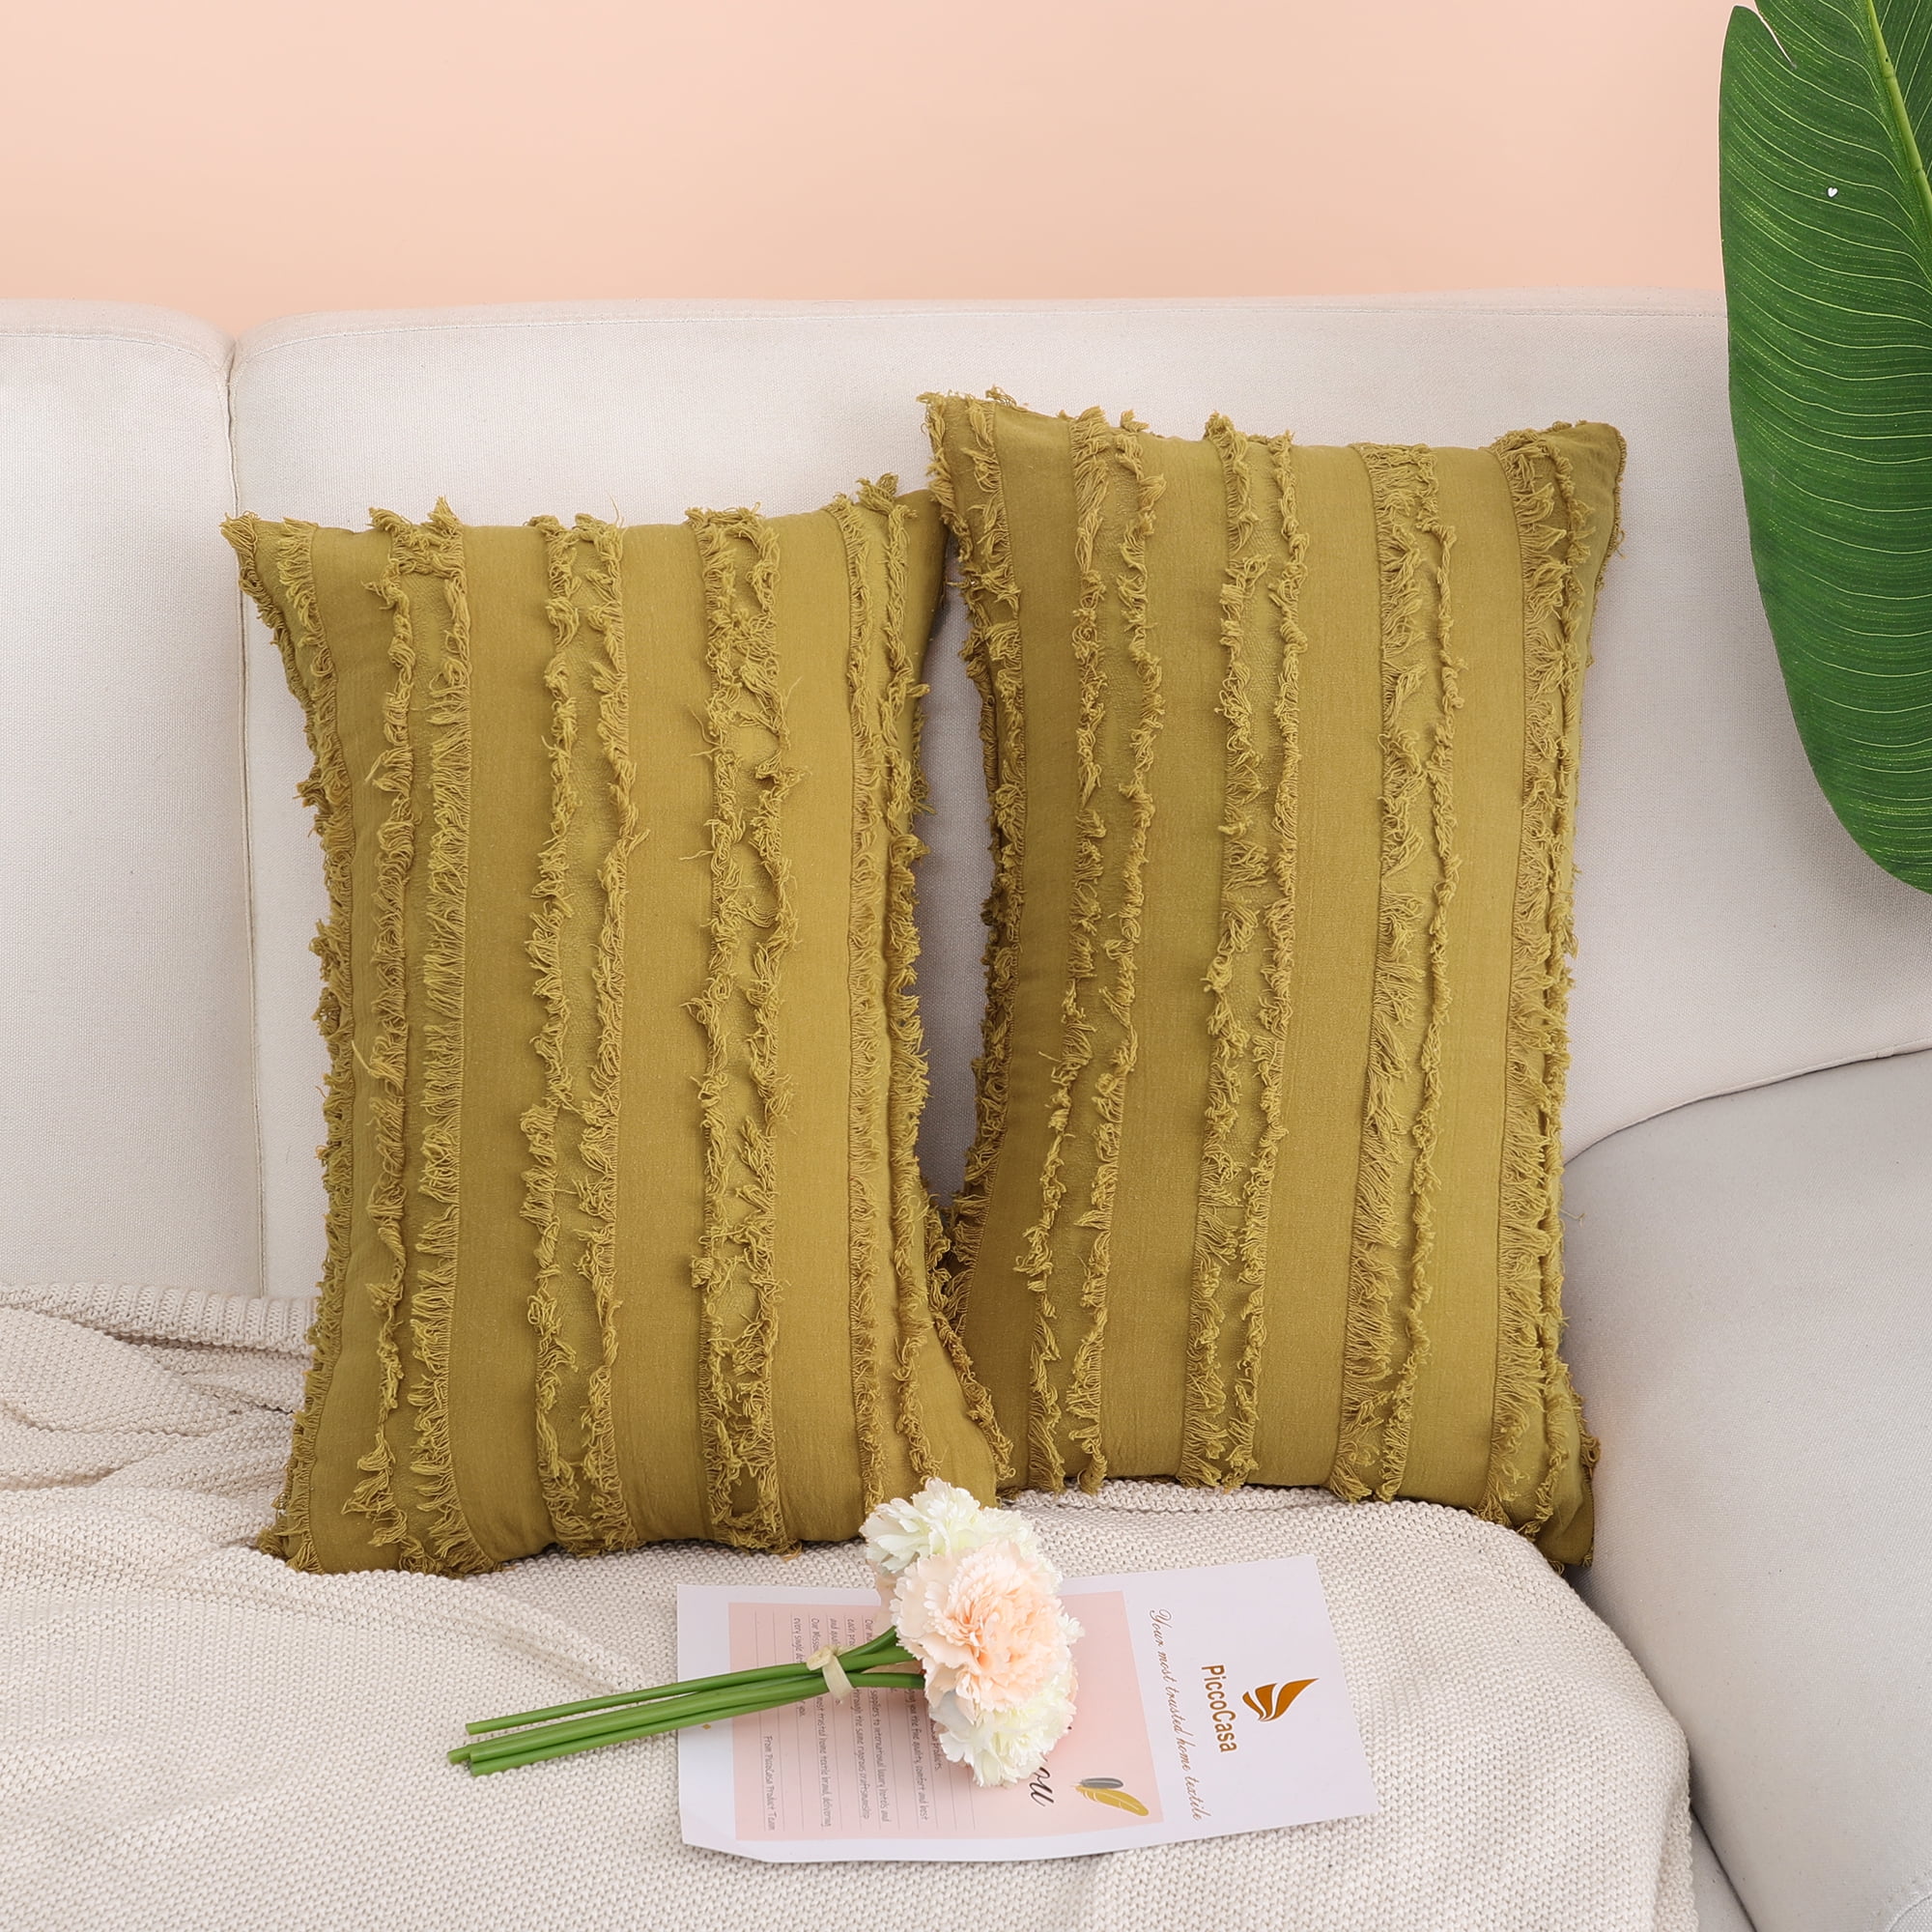 12x20 Inch Beige Bohemia Decorative Striped Cushion Covers for Sofa Bedroom Livingroom Car Seated PiccoCasa 2 Pcs Tassels Cotton Linen Throw Pillow Covers 